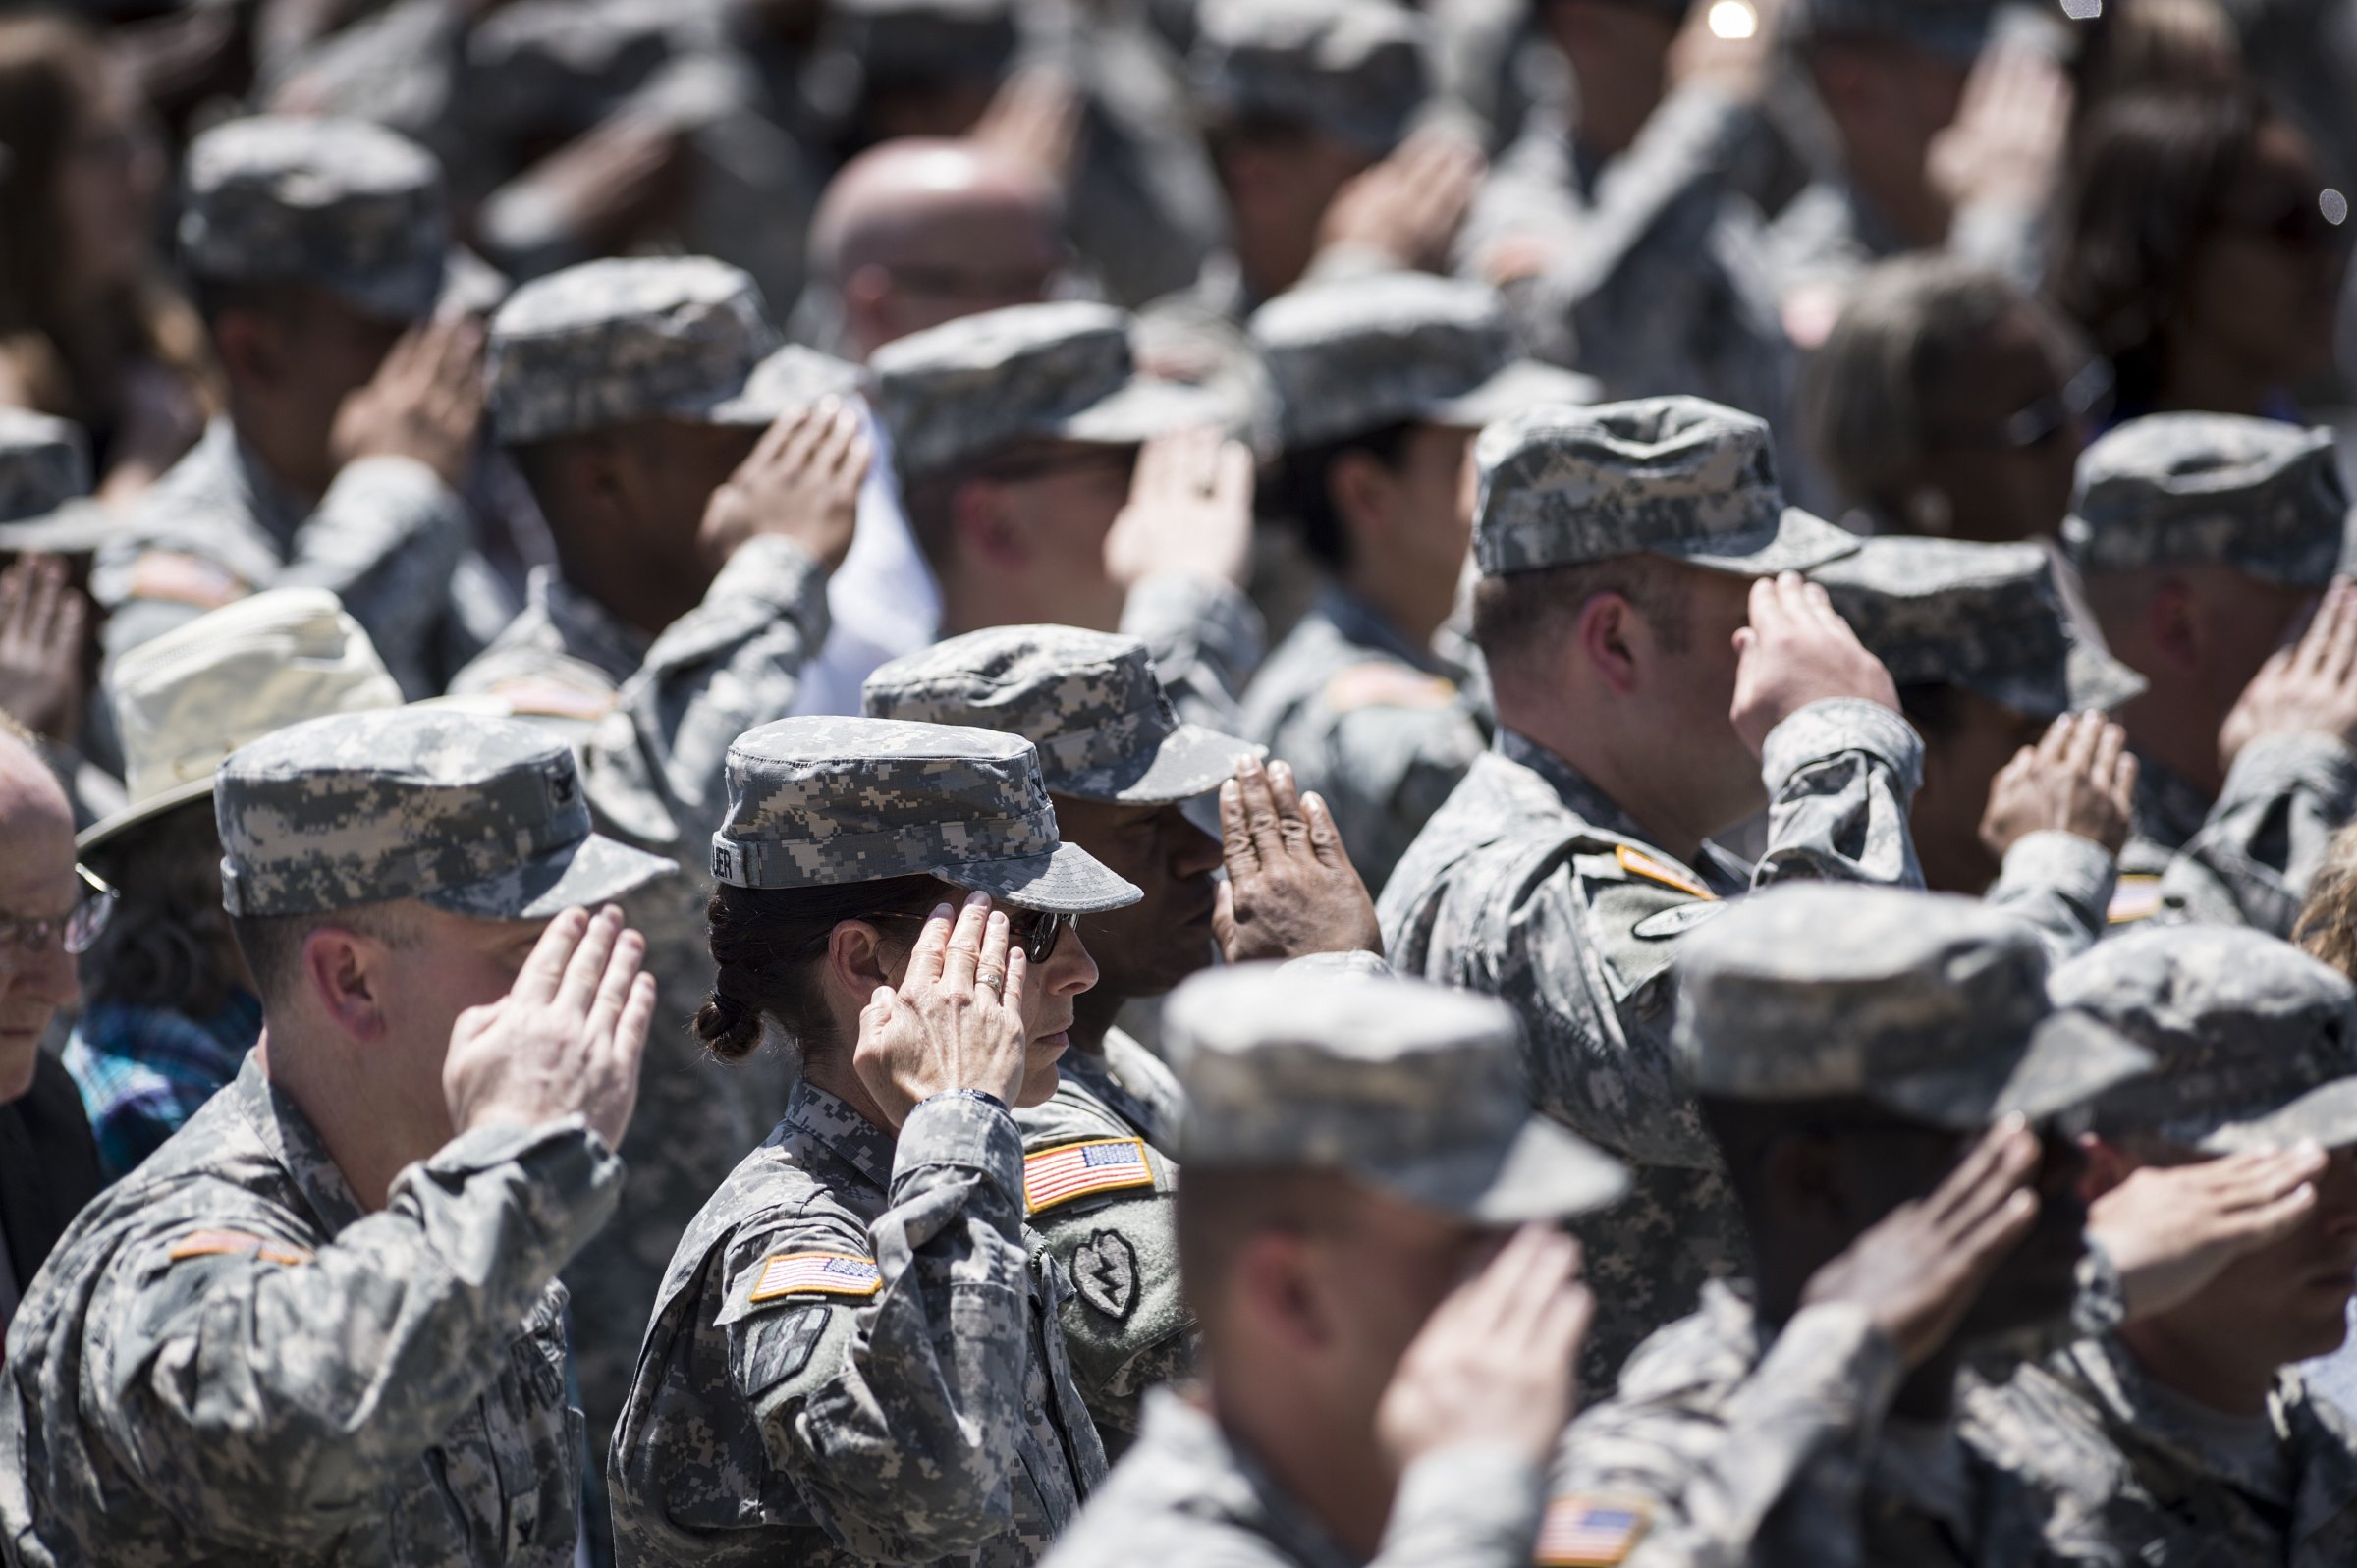 Soldiers listen to the US national anthem during a memorial service at Fort Hood in Texas on April 9, 2014.